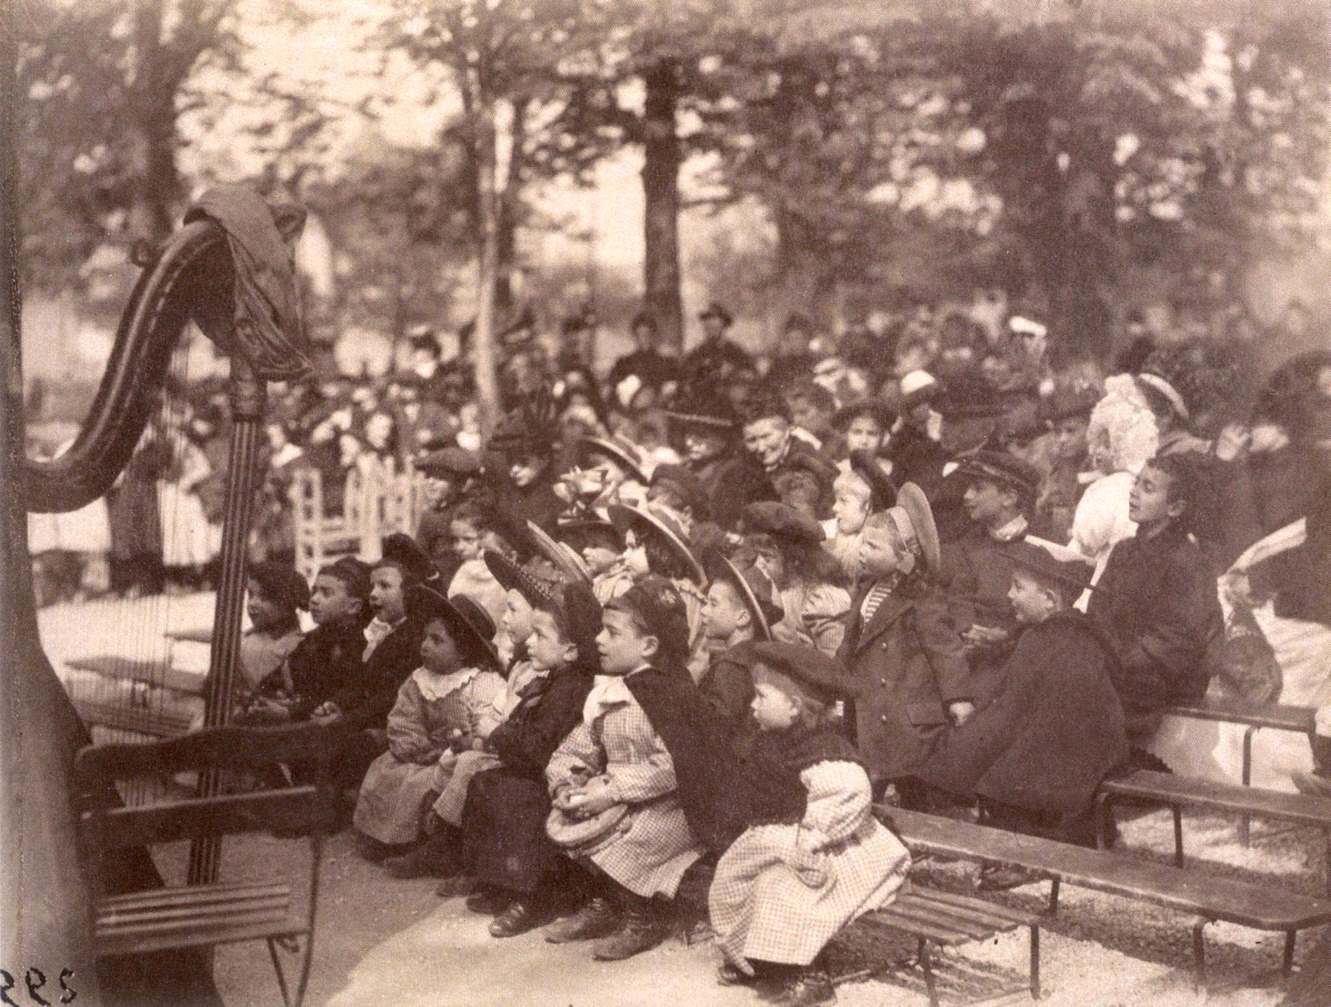 Children during a Guignol show in the Luxembourg gardens in Paris, 1899